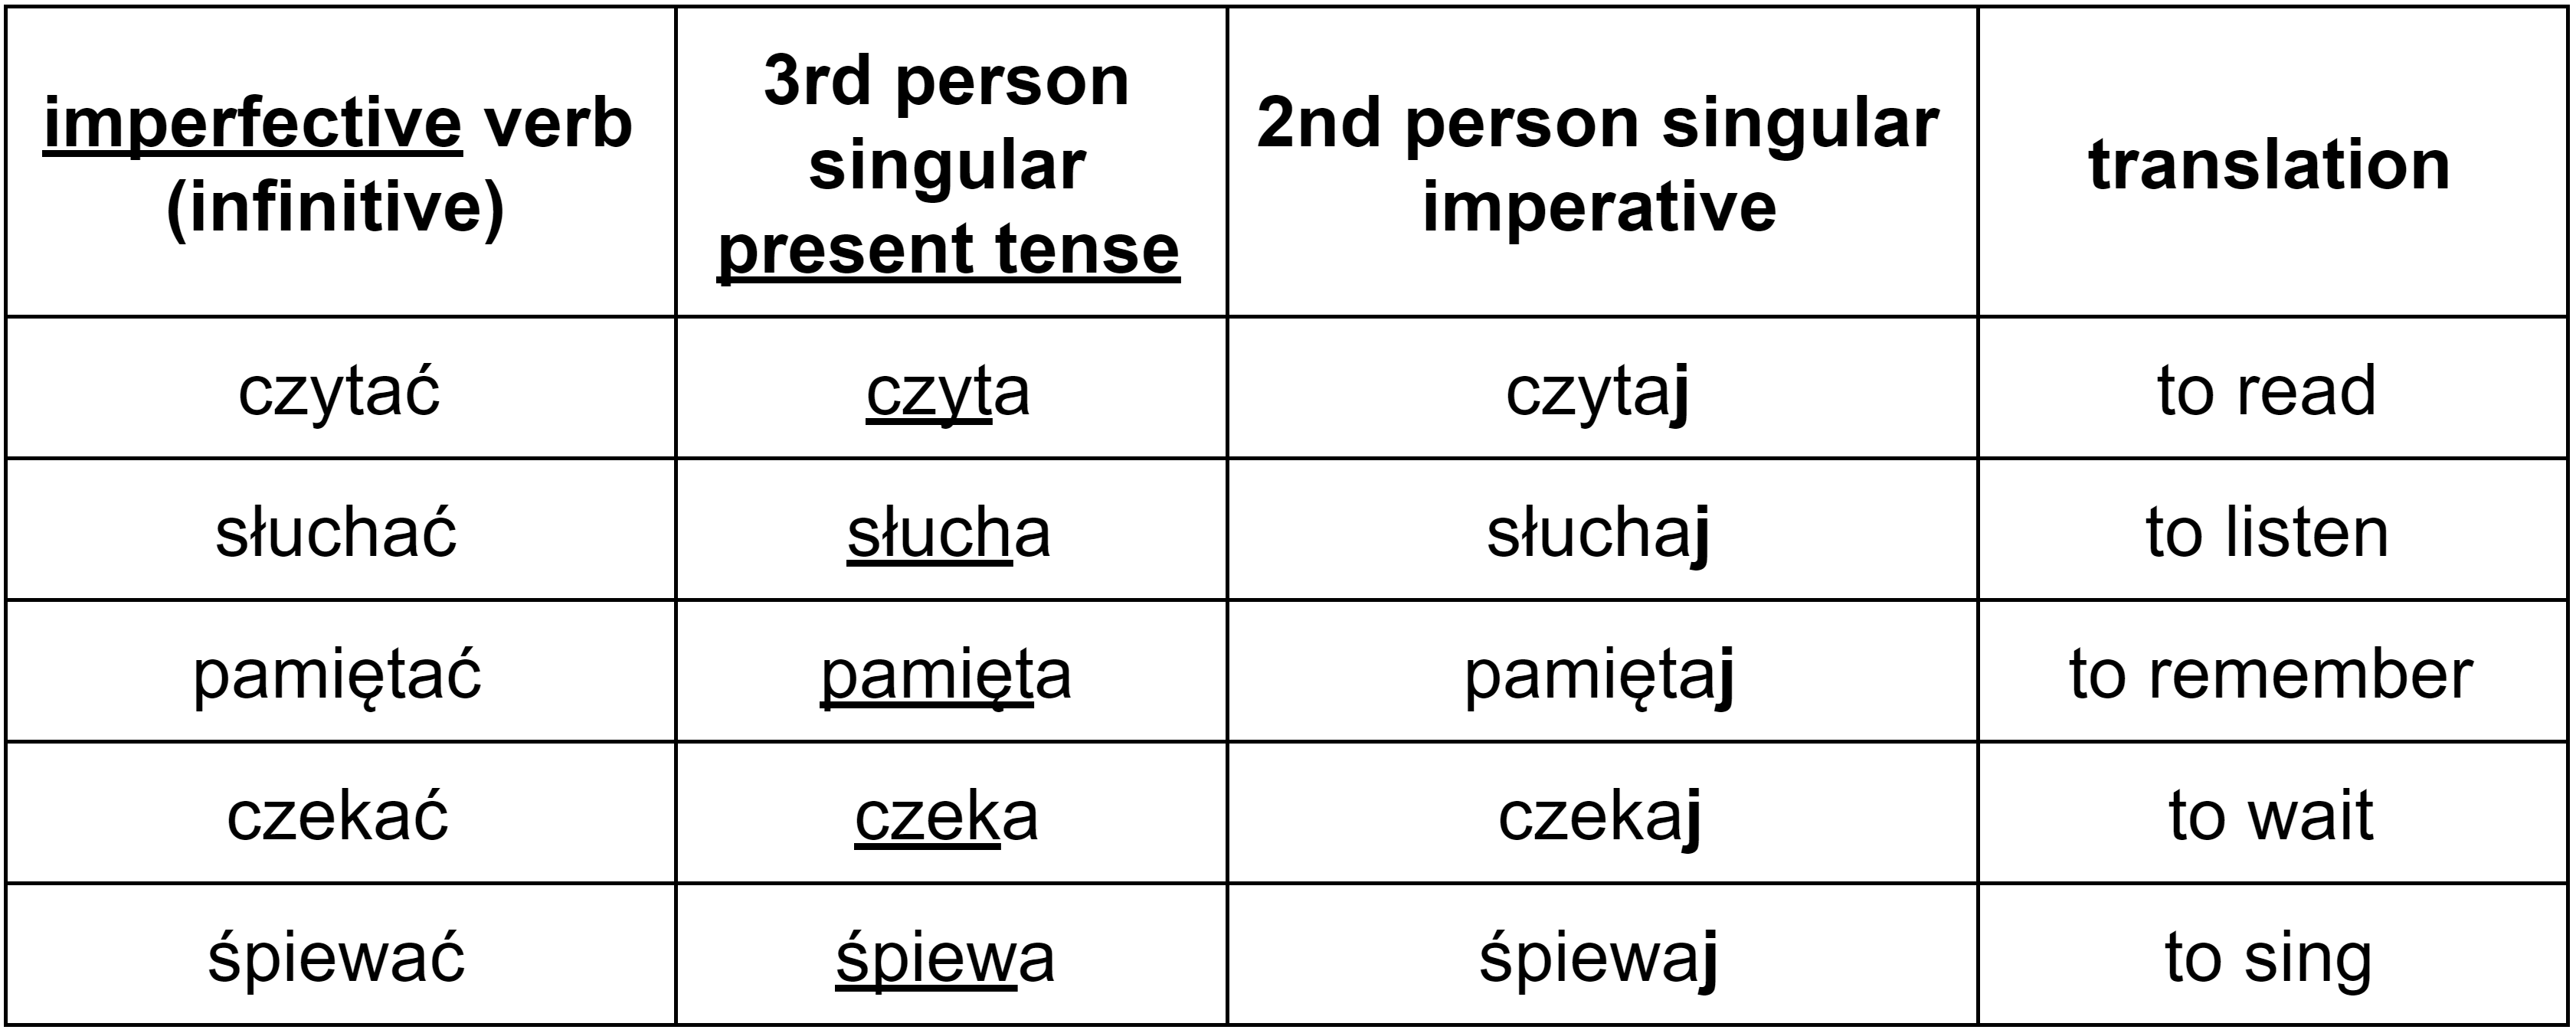 Polish imperfective imperative verbs in the second person singular with the -j ending table